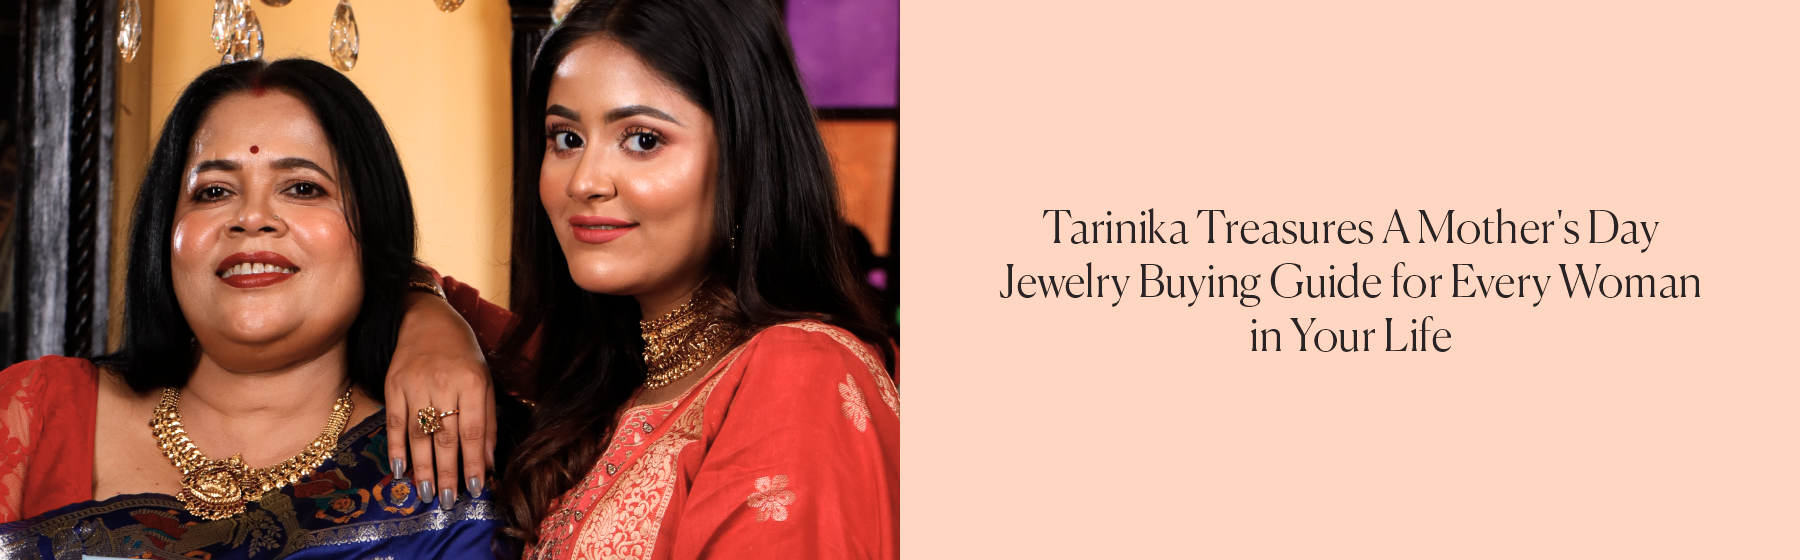 Tarinika Treasures: A Chill Mother's Day Jewelry Buying Guide for All the Special Women in Your Life